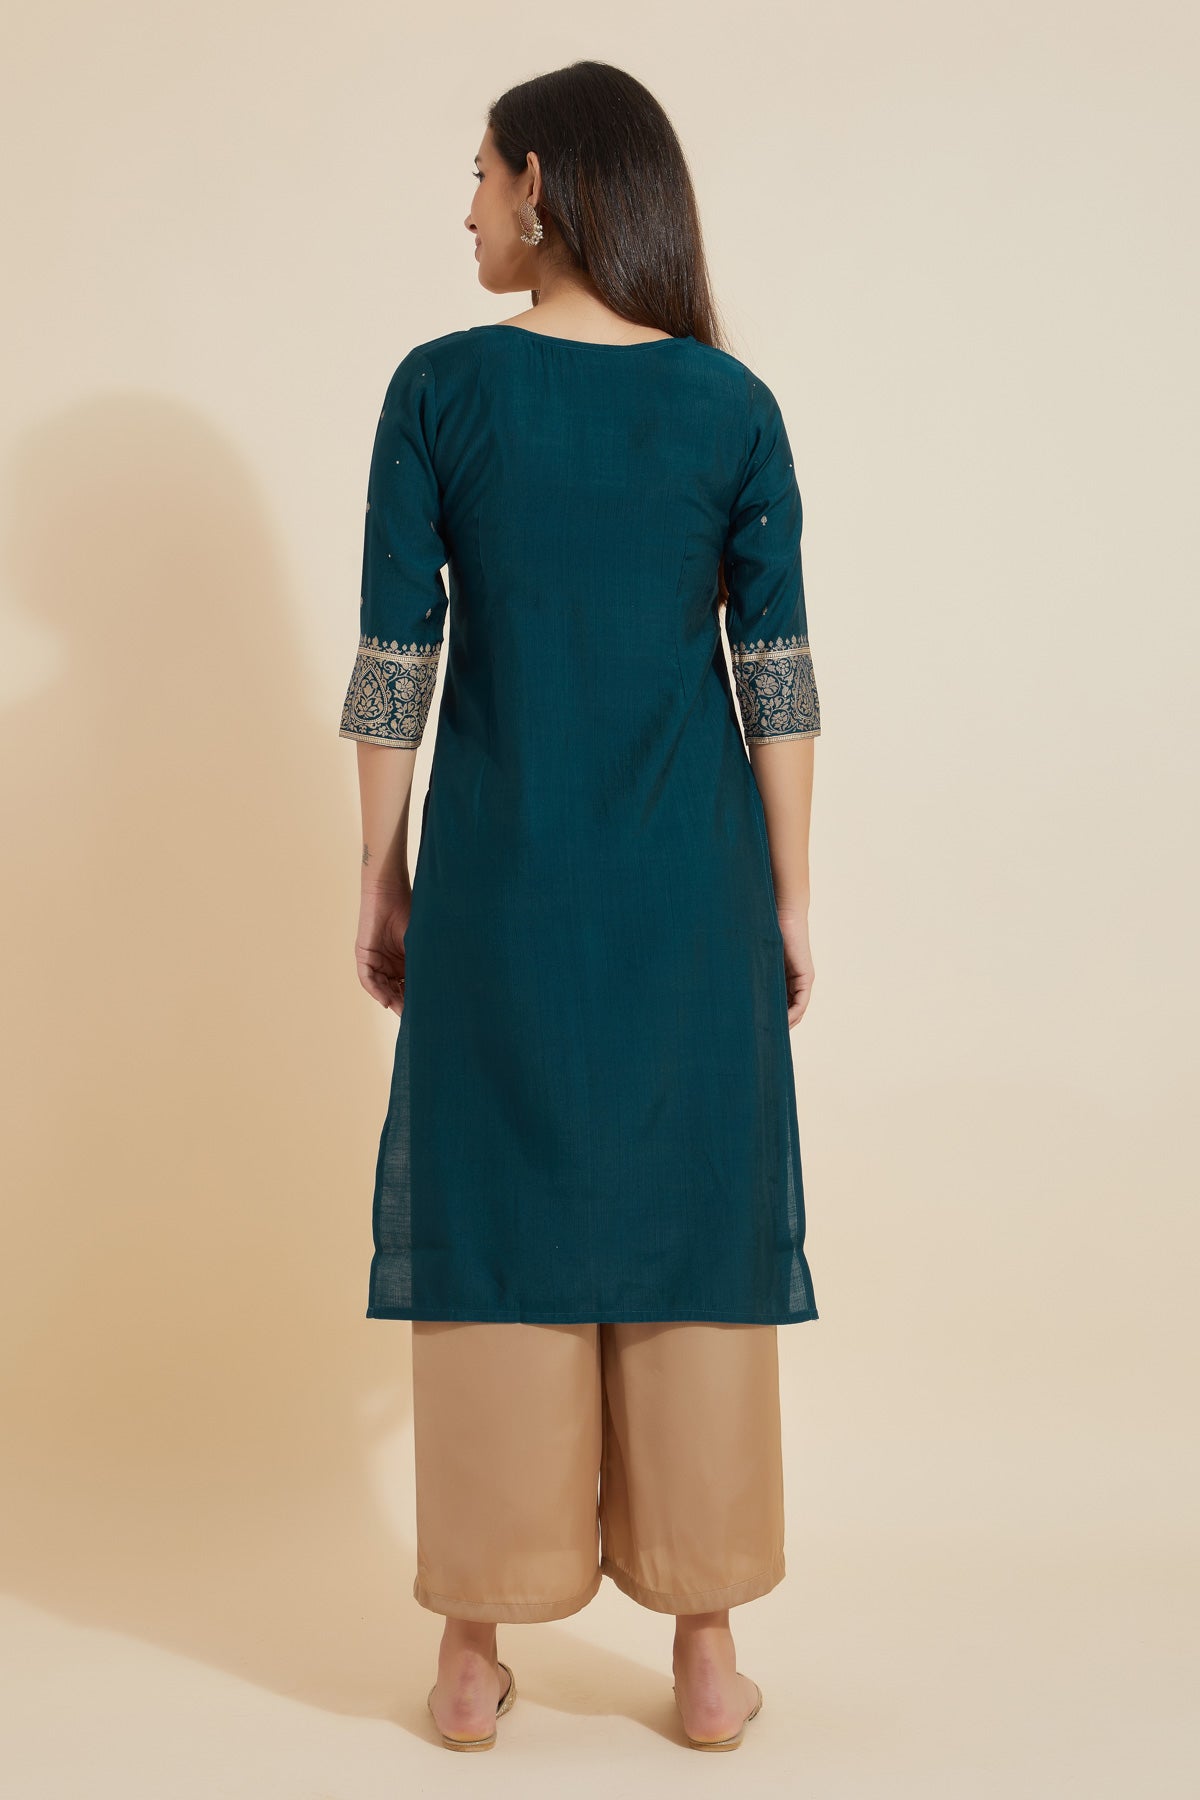 Jewel Inspired Embroidered Neckline With Contemporary Printed Border - Blue